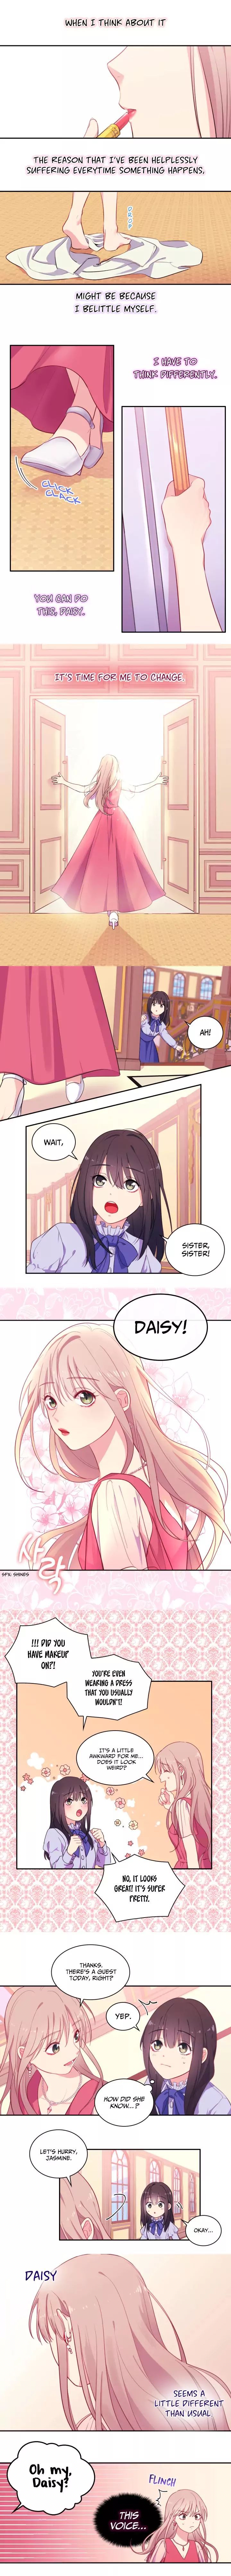 Daisy: How to Become the Duke’s Fiancée Chapter 3 - Page 3